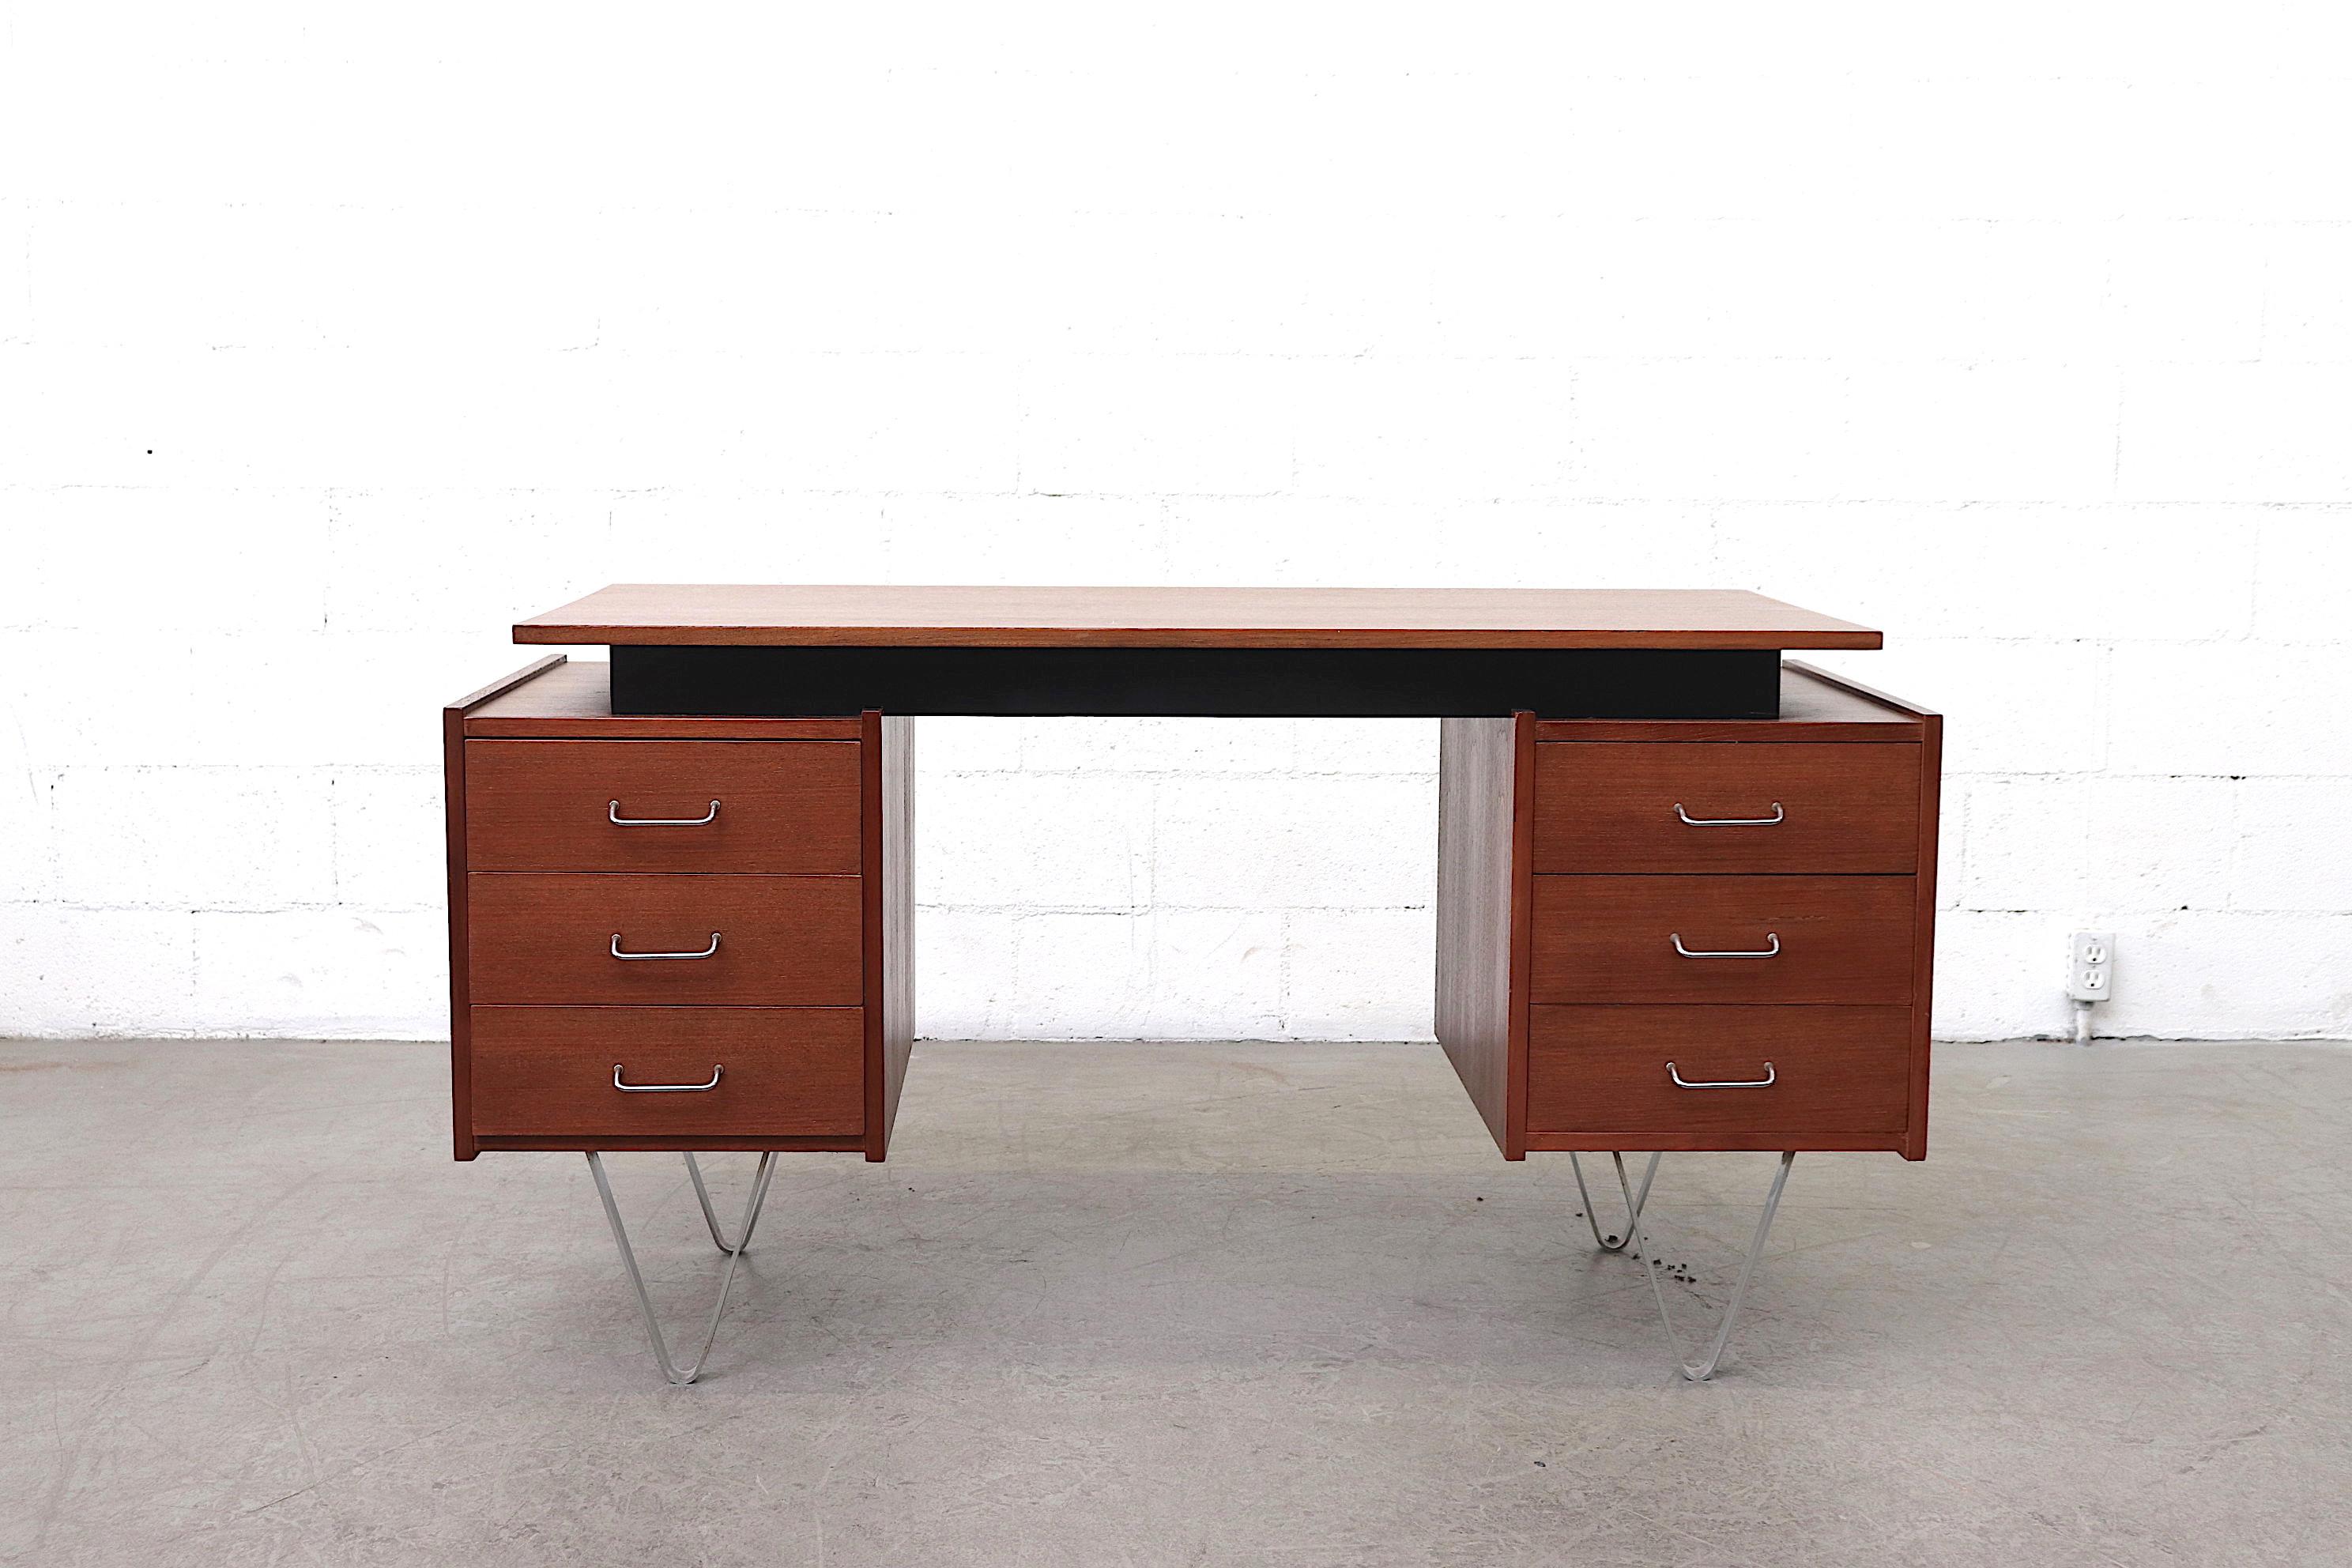 Midcentury executive desk designed by Cees Braakman for Pastoe. Lightly refinished teak. Floating top with black painted wood riser and flat chrome hairpin legs. Good original condition with wear consistent with its age and usage.